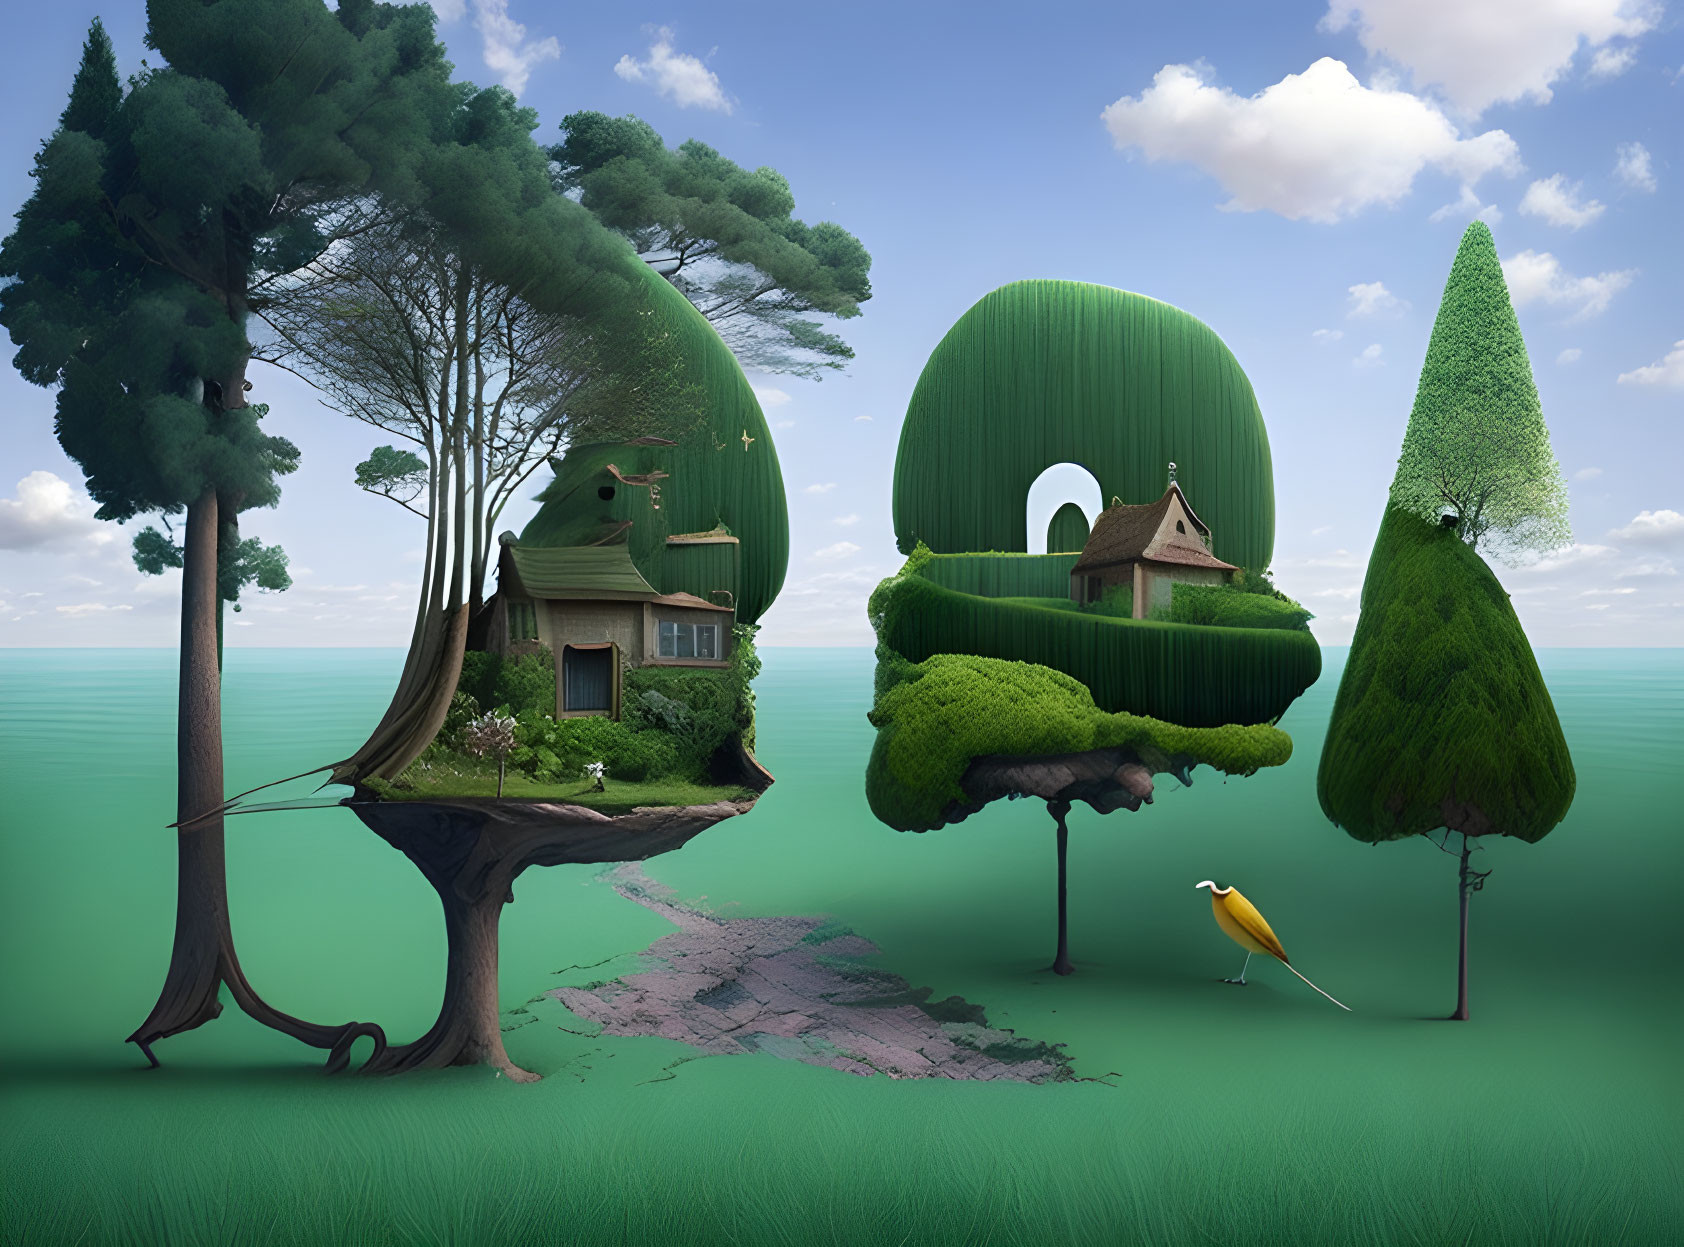 Whimsical tree-shaped houses in surreal landscape under blue sky